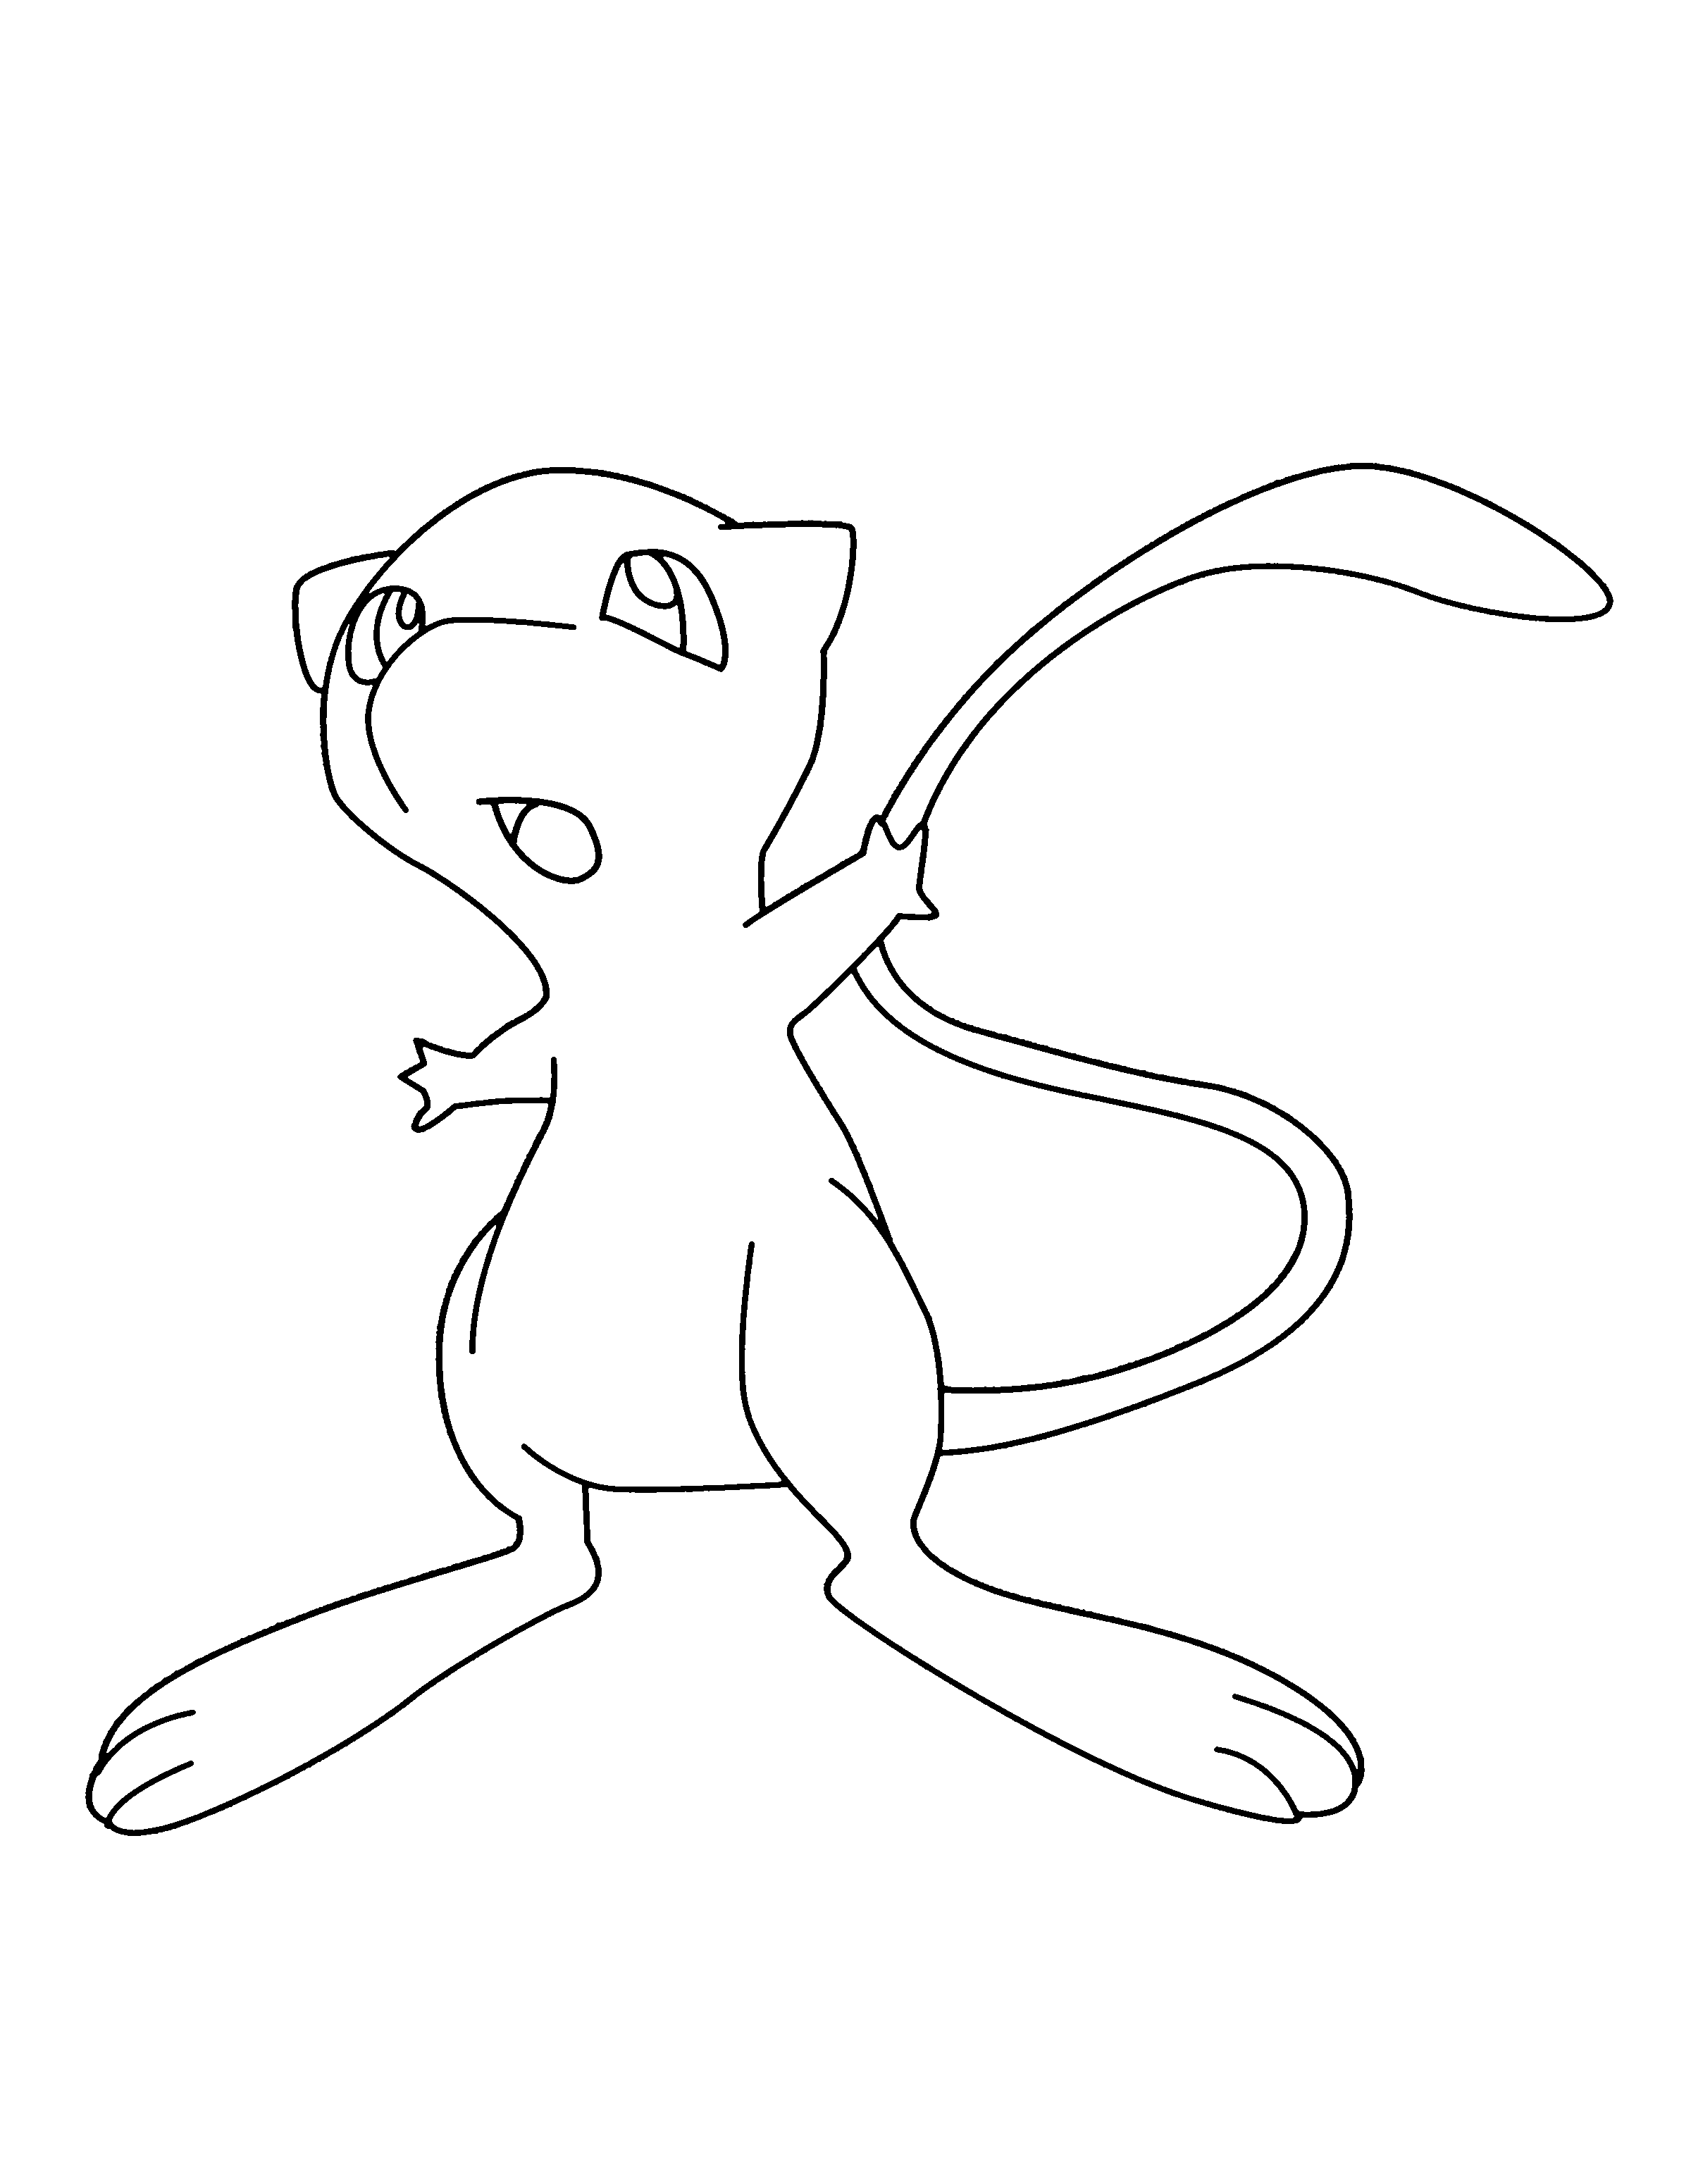 animated-coloring-pages-pokemon-image-0181